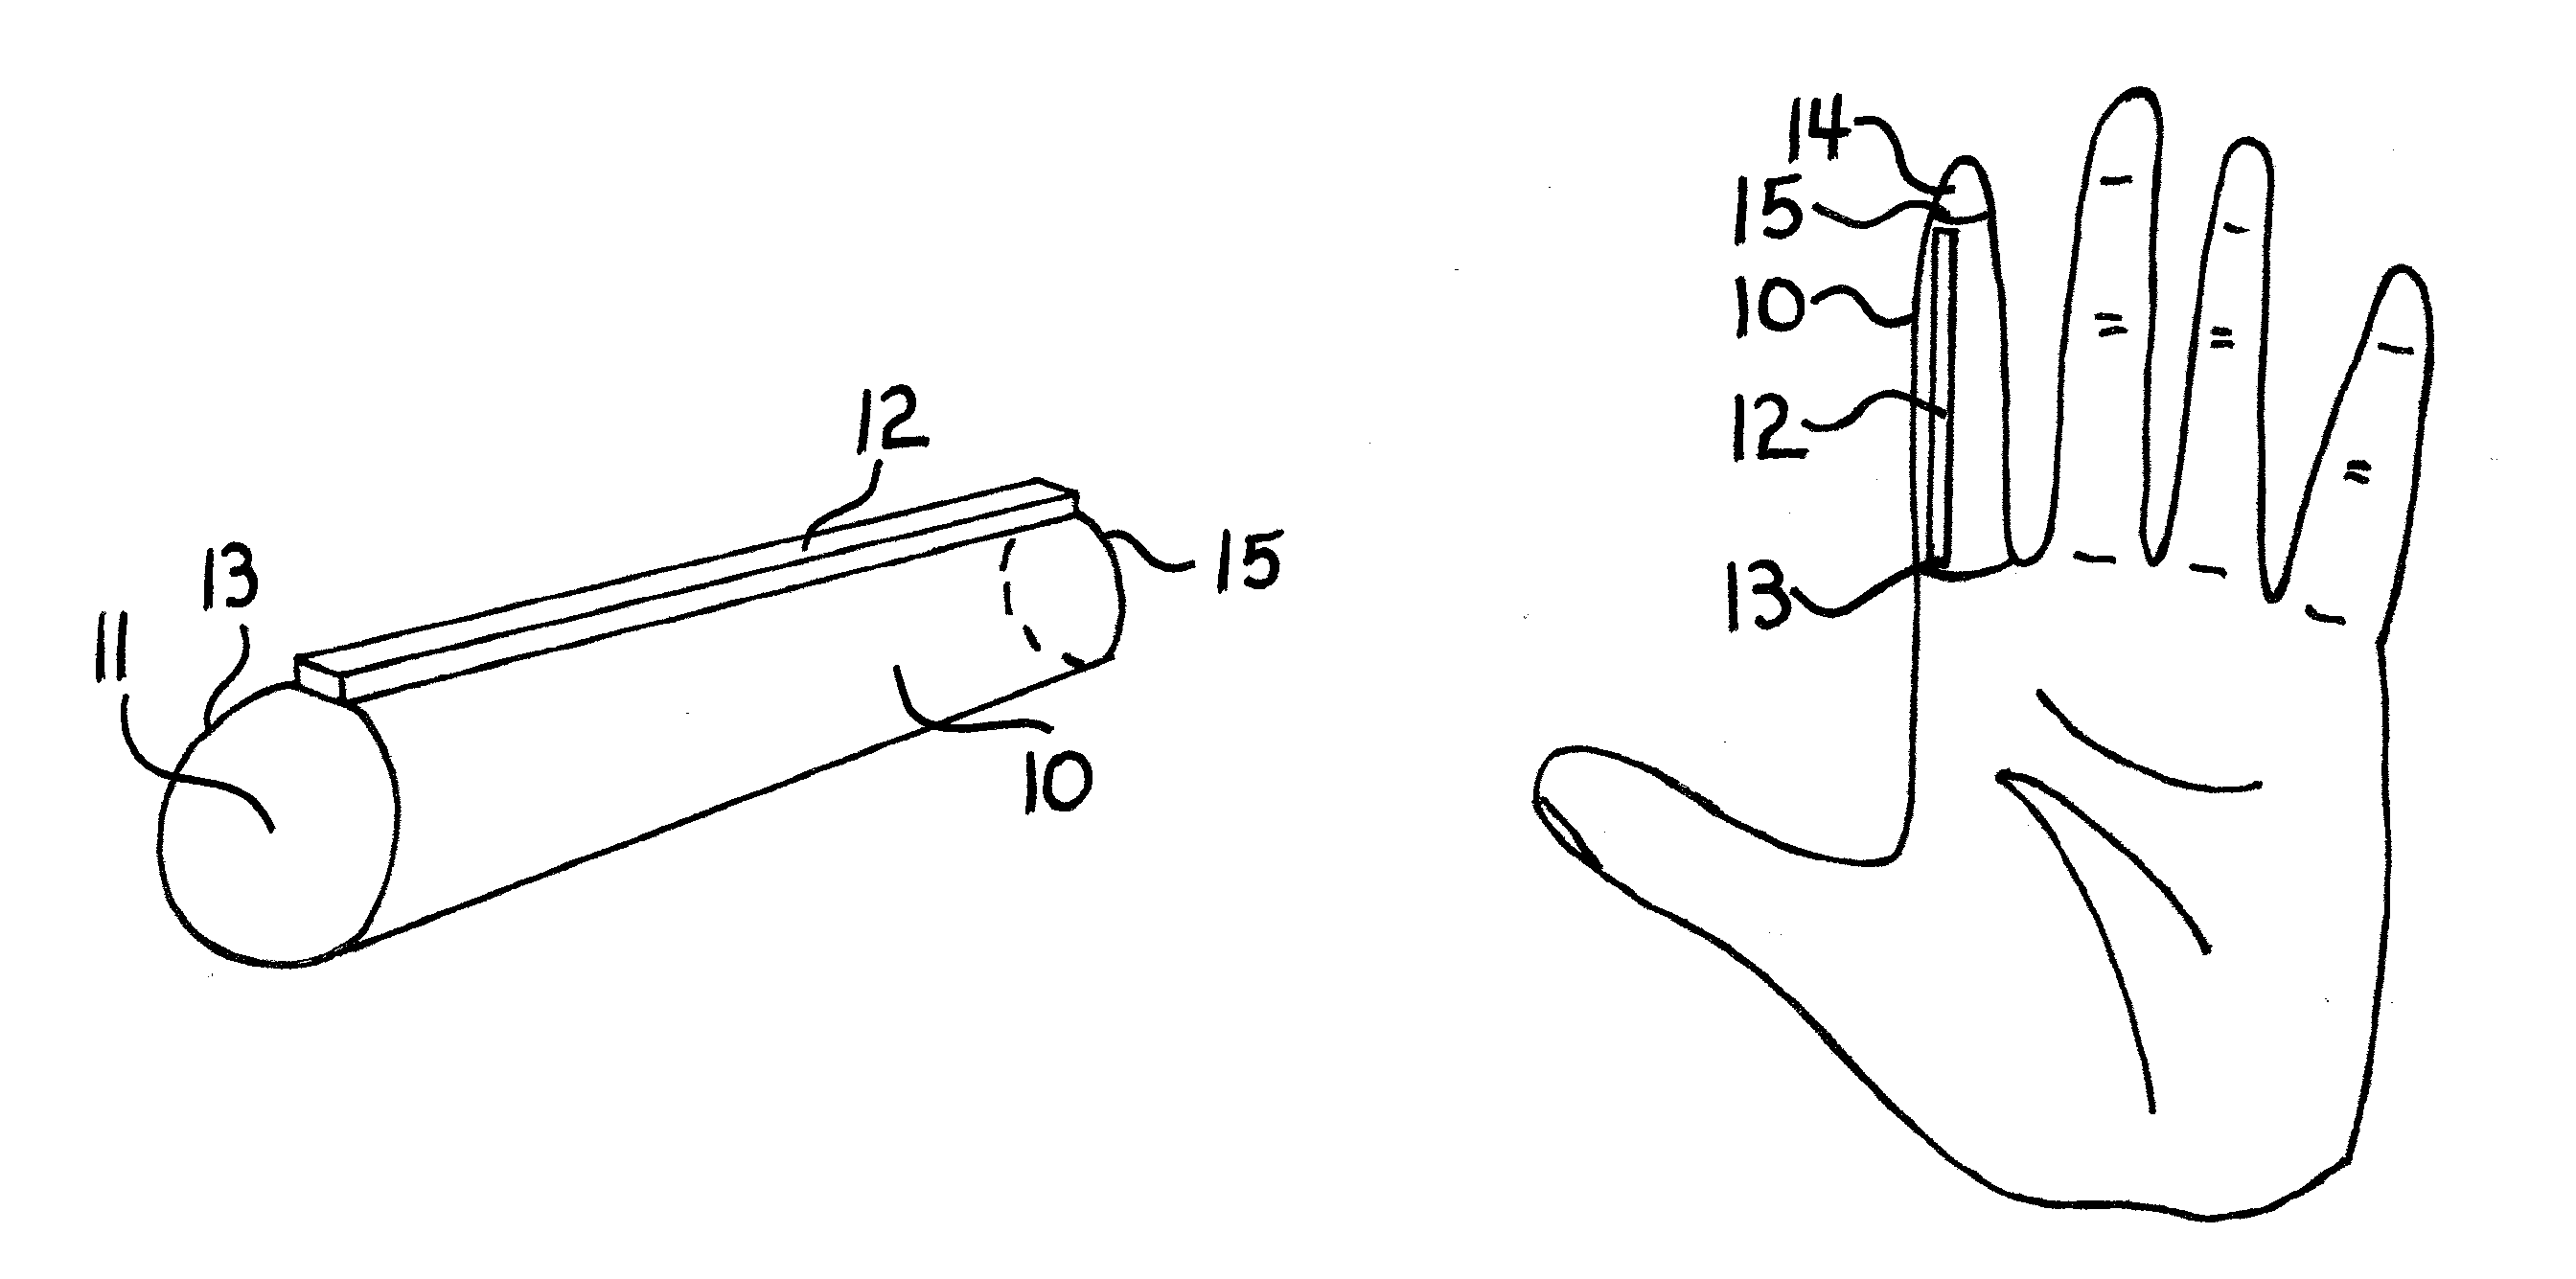 Finger sleeve with raised flexible bar for playing barre chords